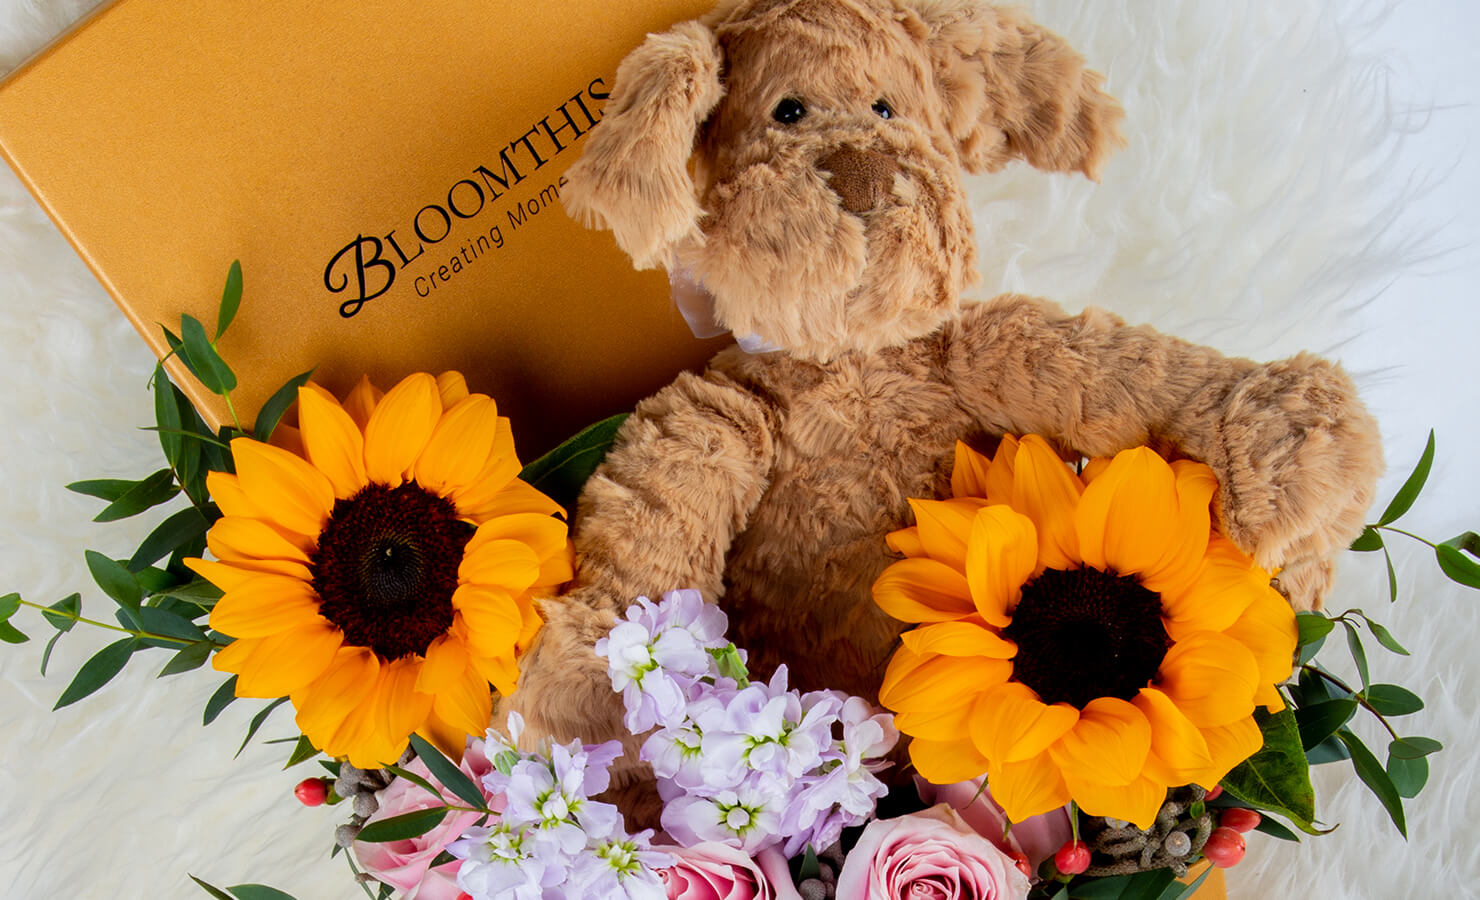 bloomthis-sunflower-products-goldilocks